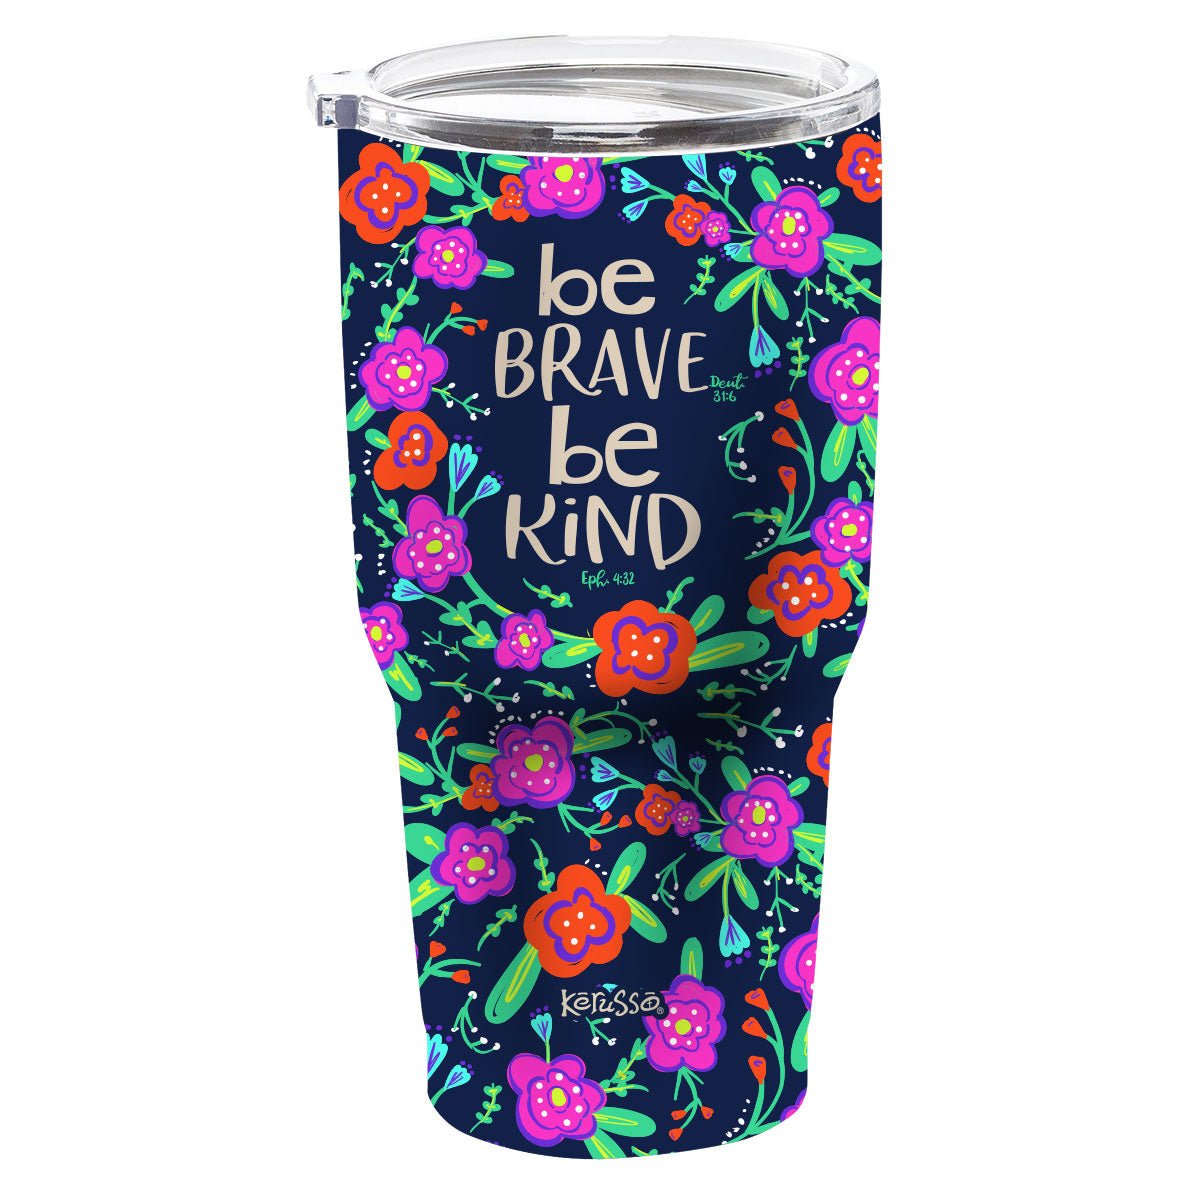 Kerusso Be Kind 30 oz Stainless Steel Tumbler | 2FruitBearers